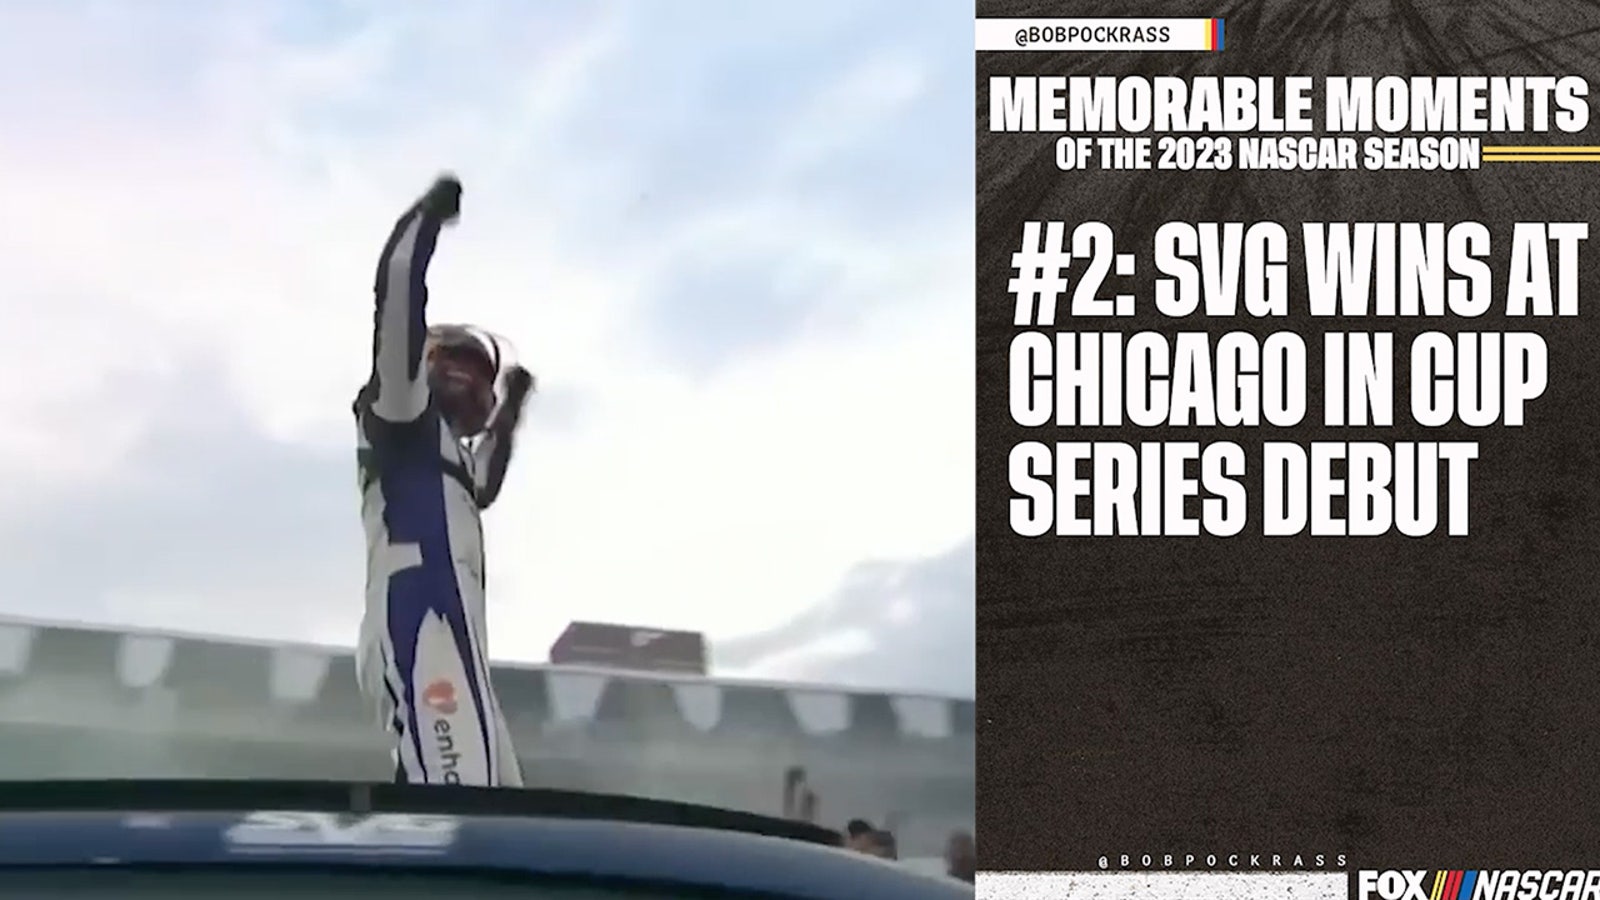 SVG Wins At Chicago In Cup Series Debut: No. 2 | Most Memorable Moments of the 2023 NASCAR Season